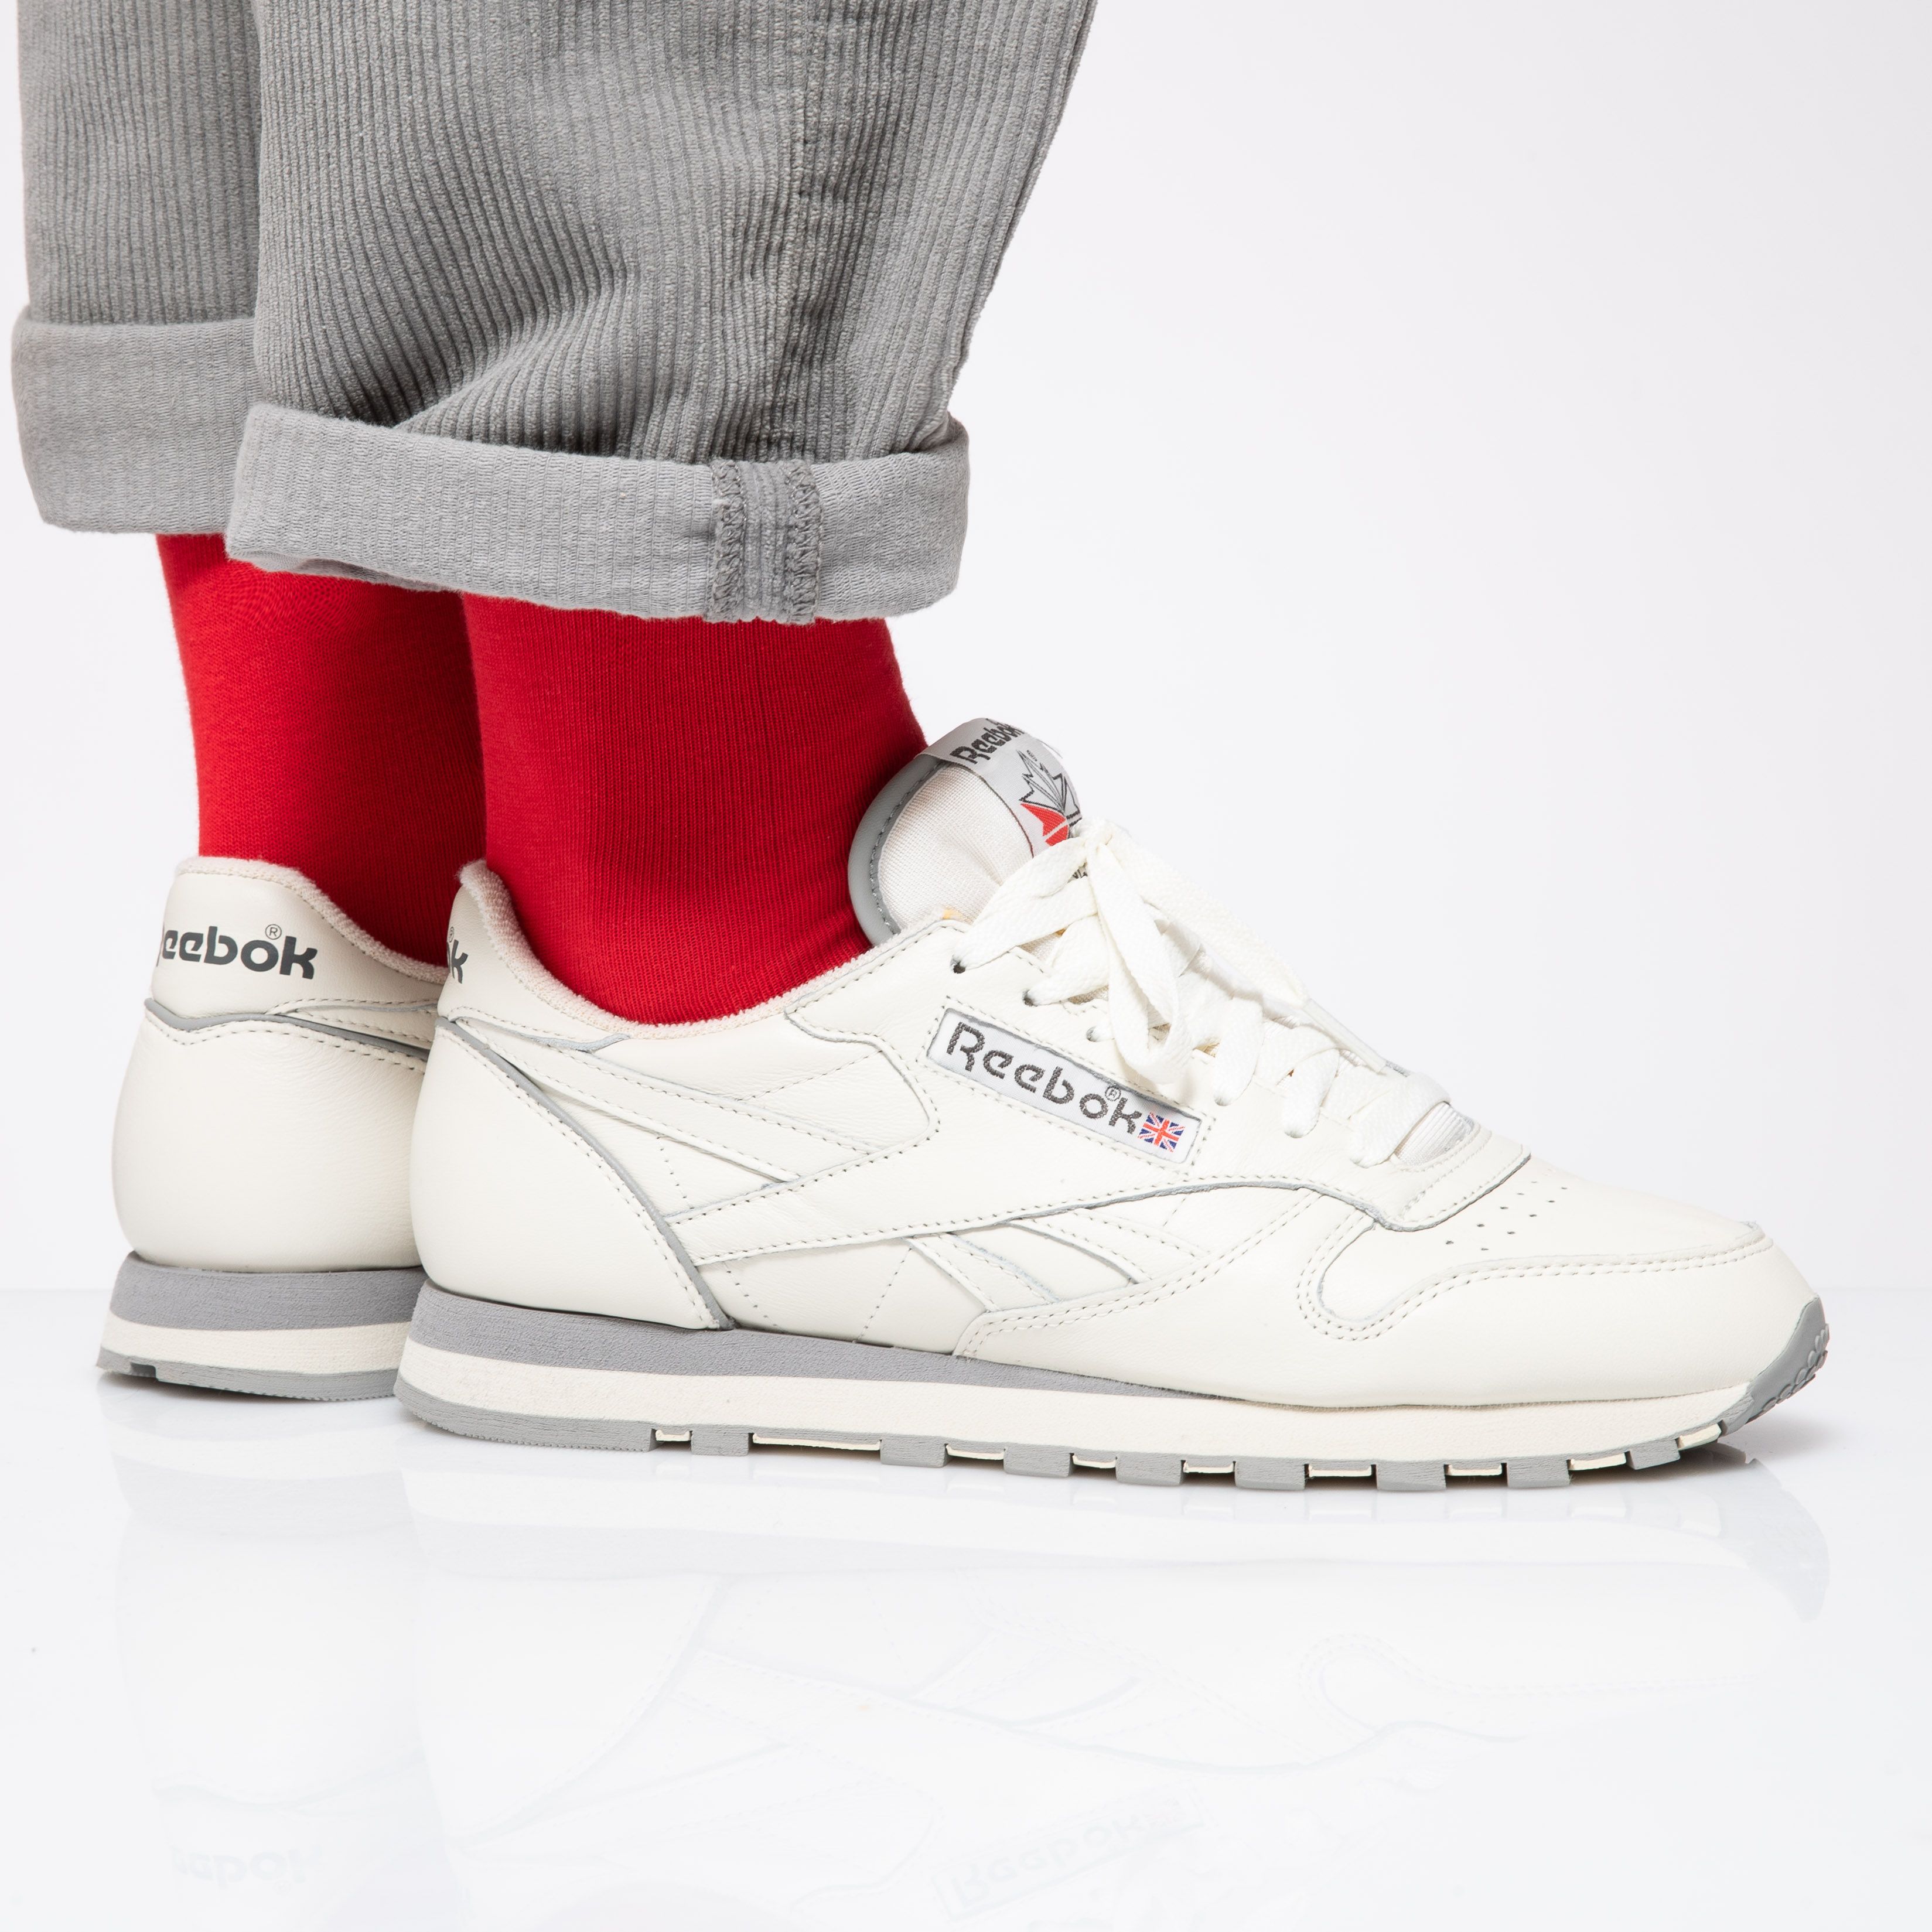 Titolo on Twitter: "a timeless icon that was created in as a premium leather runner 🏃 the Reebok Classic Leather is now available ➡️ https://t.co/2SiKRNvfhB 8 (40.5) - US 11.5 (